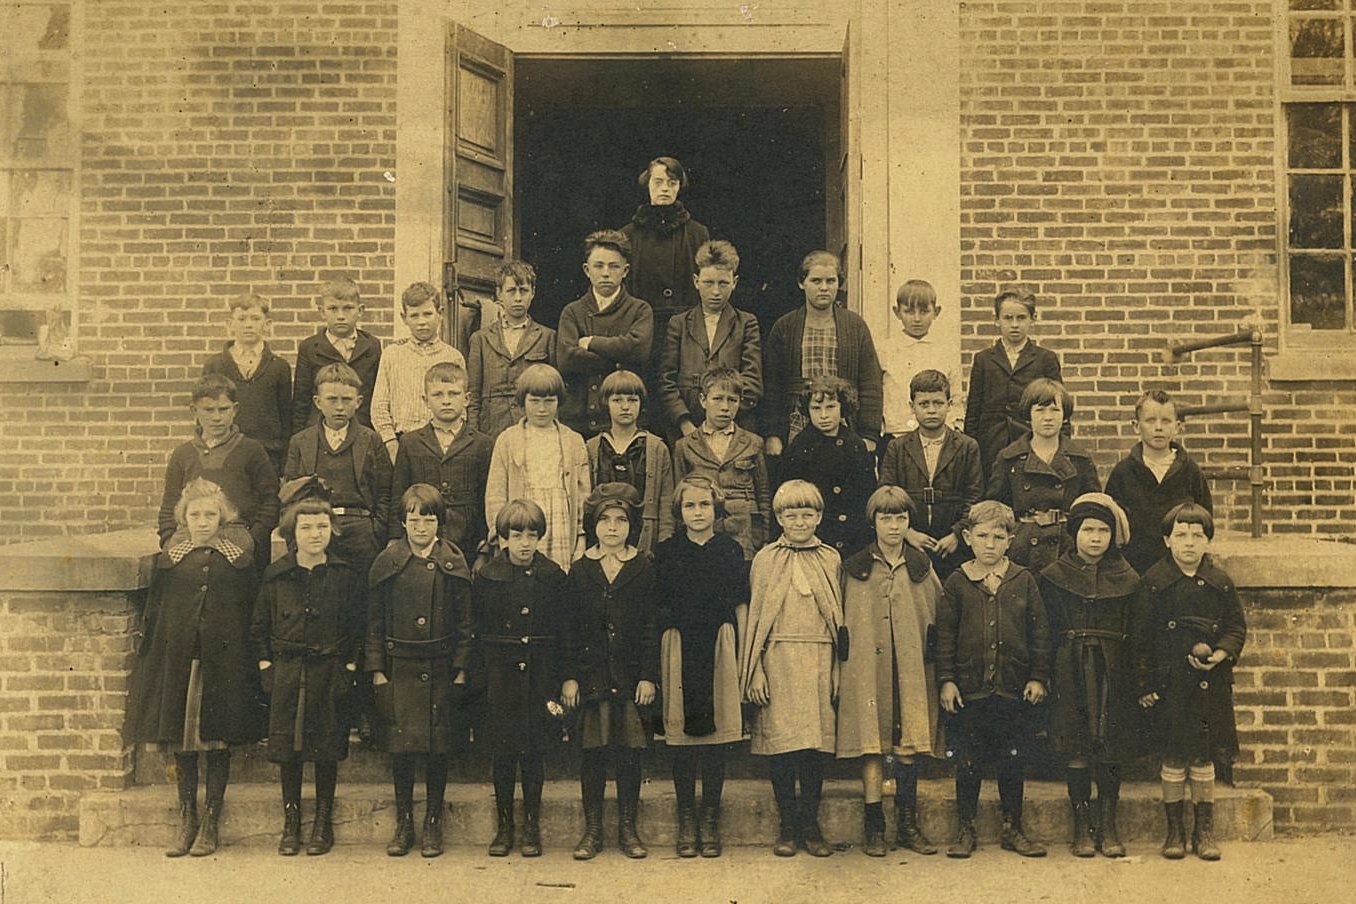 Esther Gay with her Monticello High School Class - about 1924